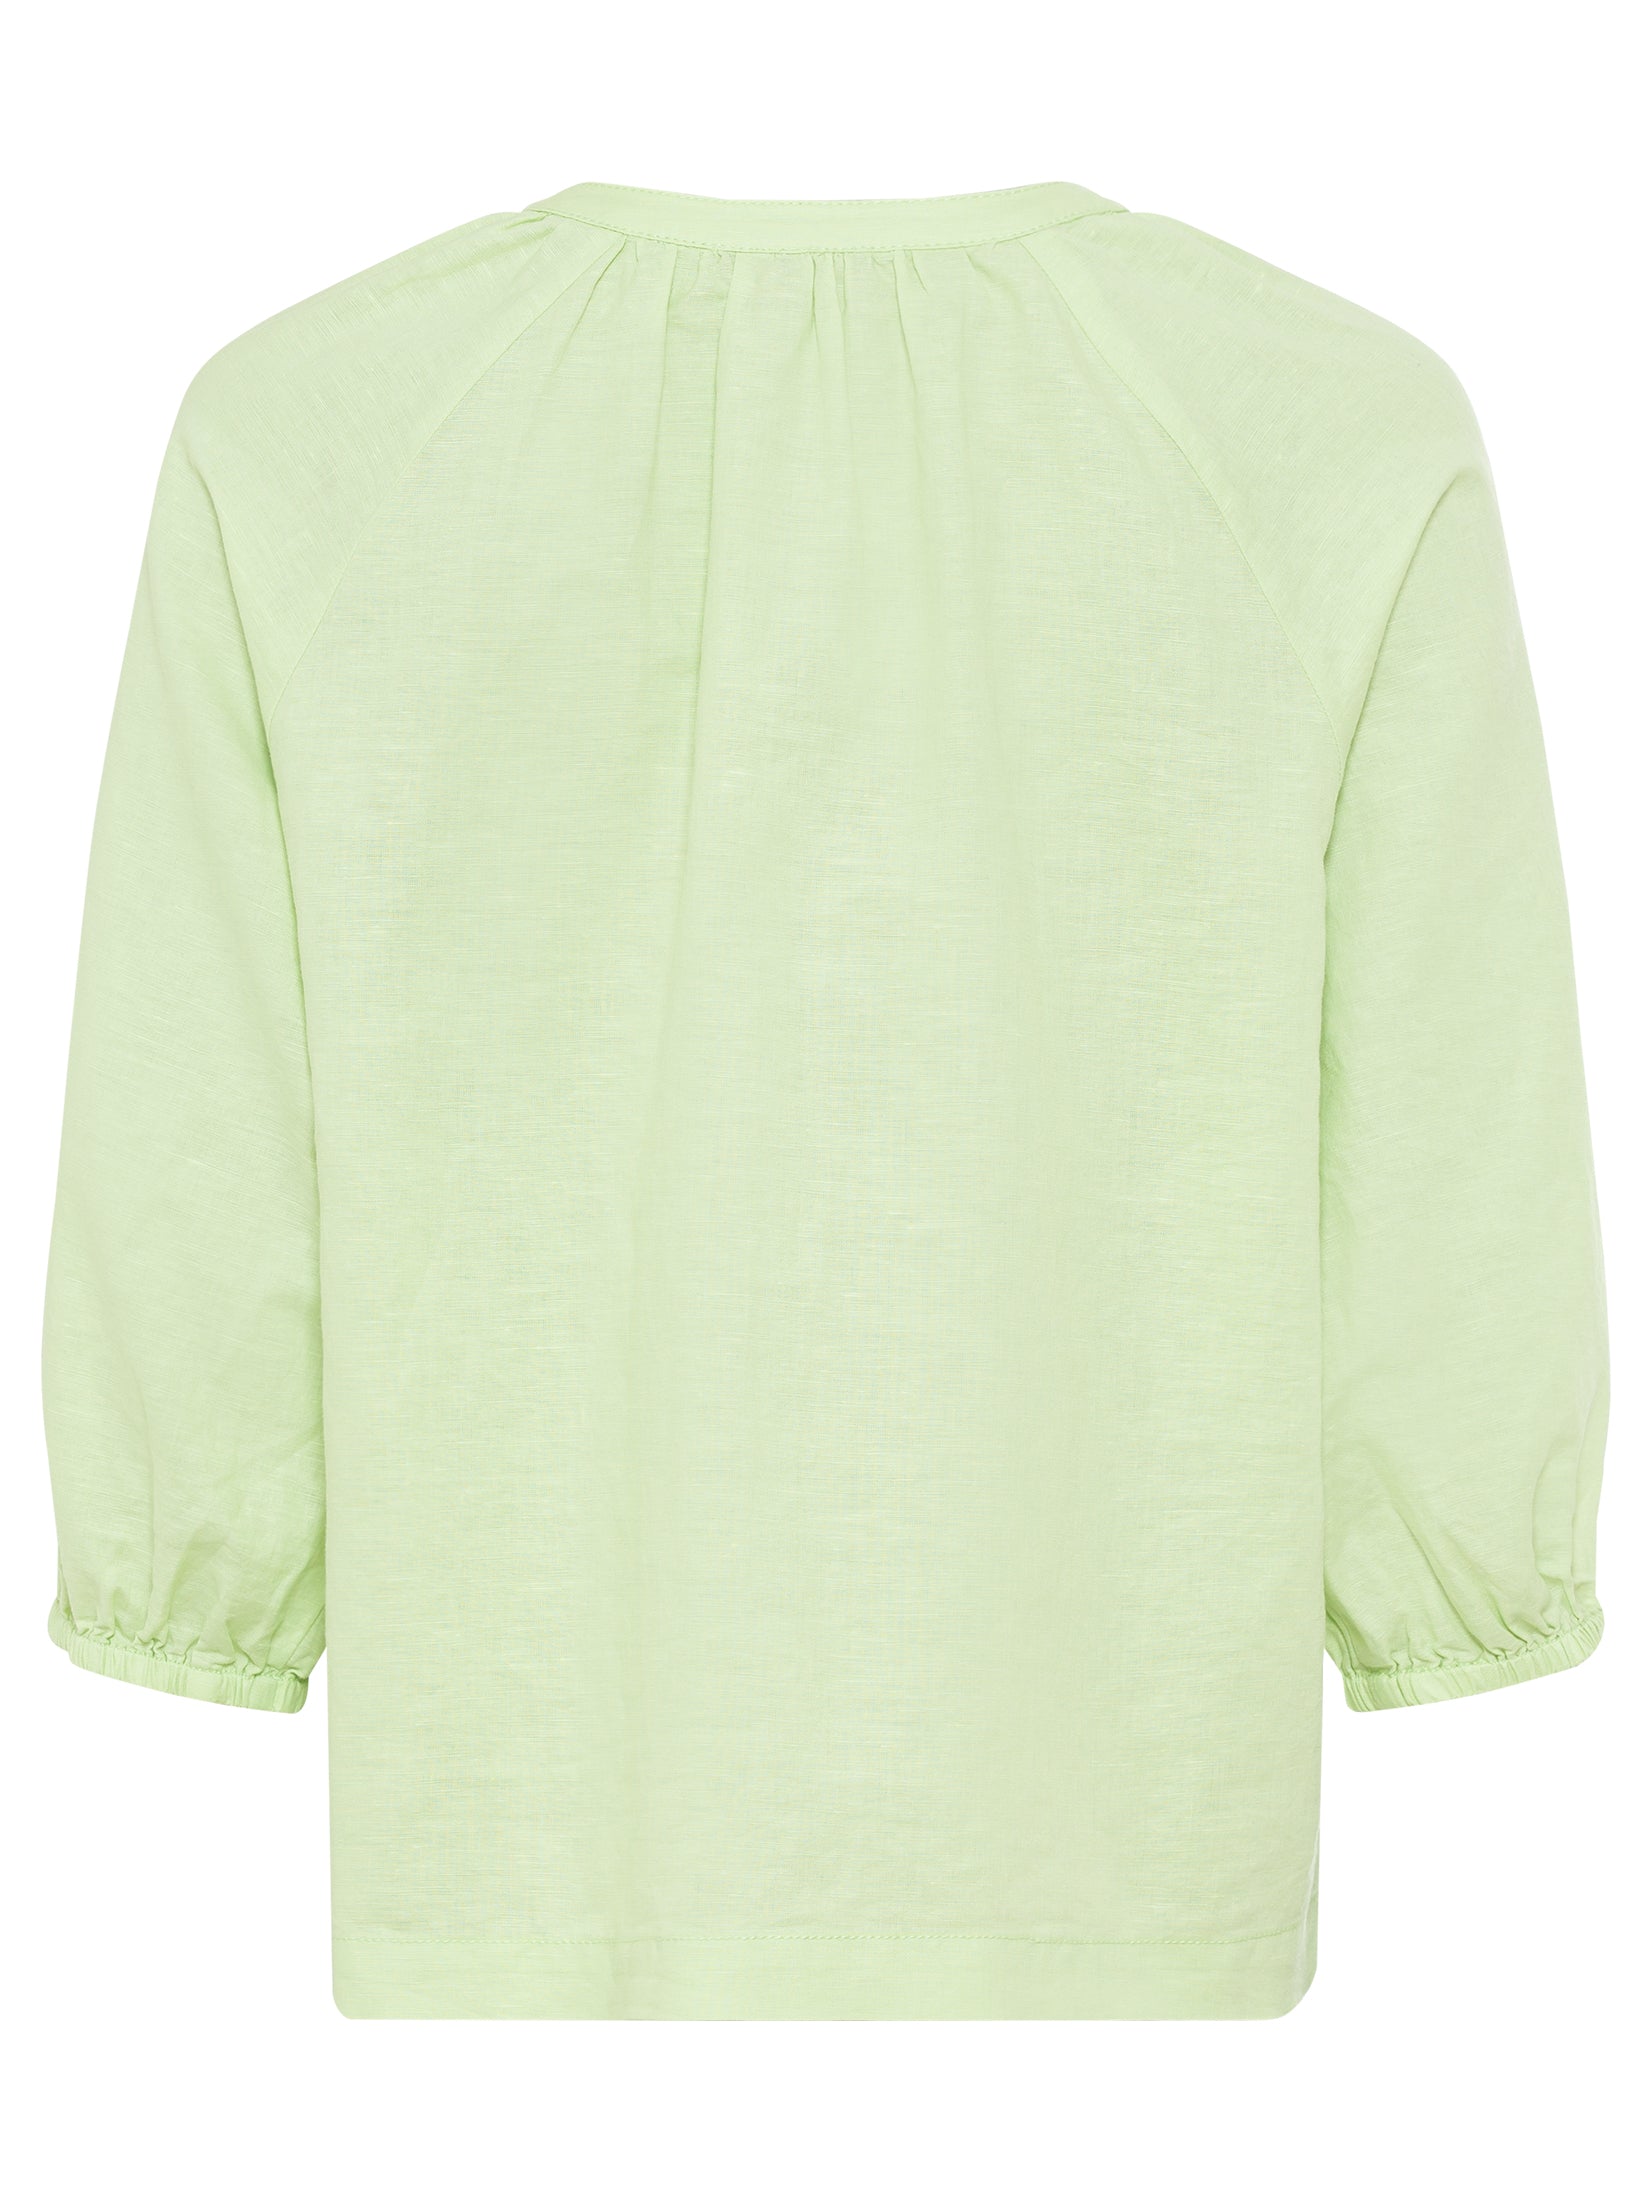 Woven Blouse in Light Lime